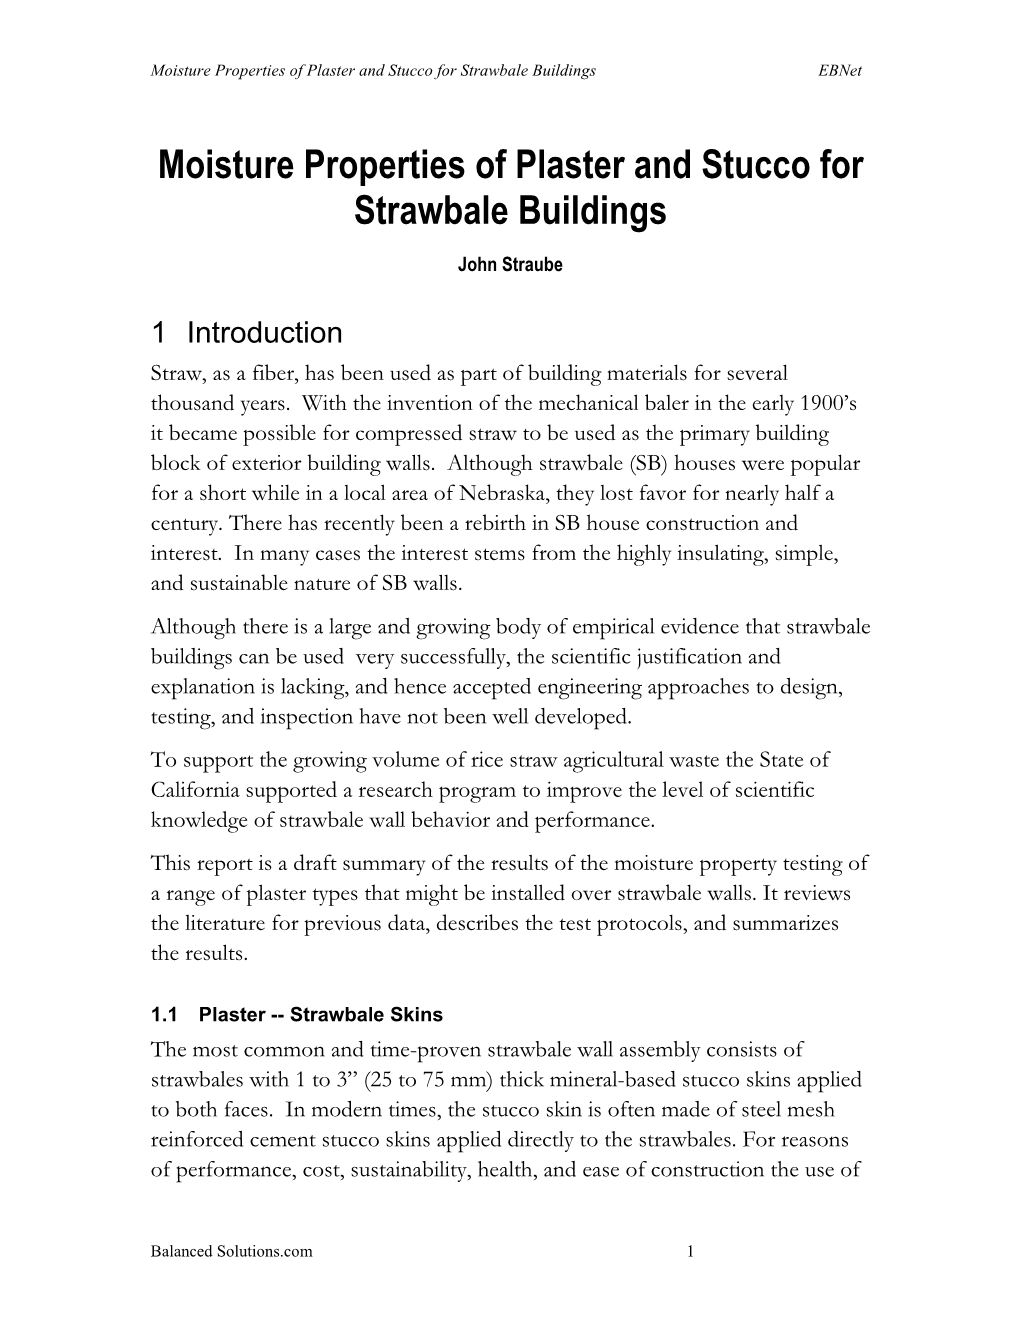 Moisture Properties of Plaster and Stucco for Strawbale Buildings Ebnet